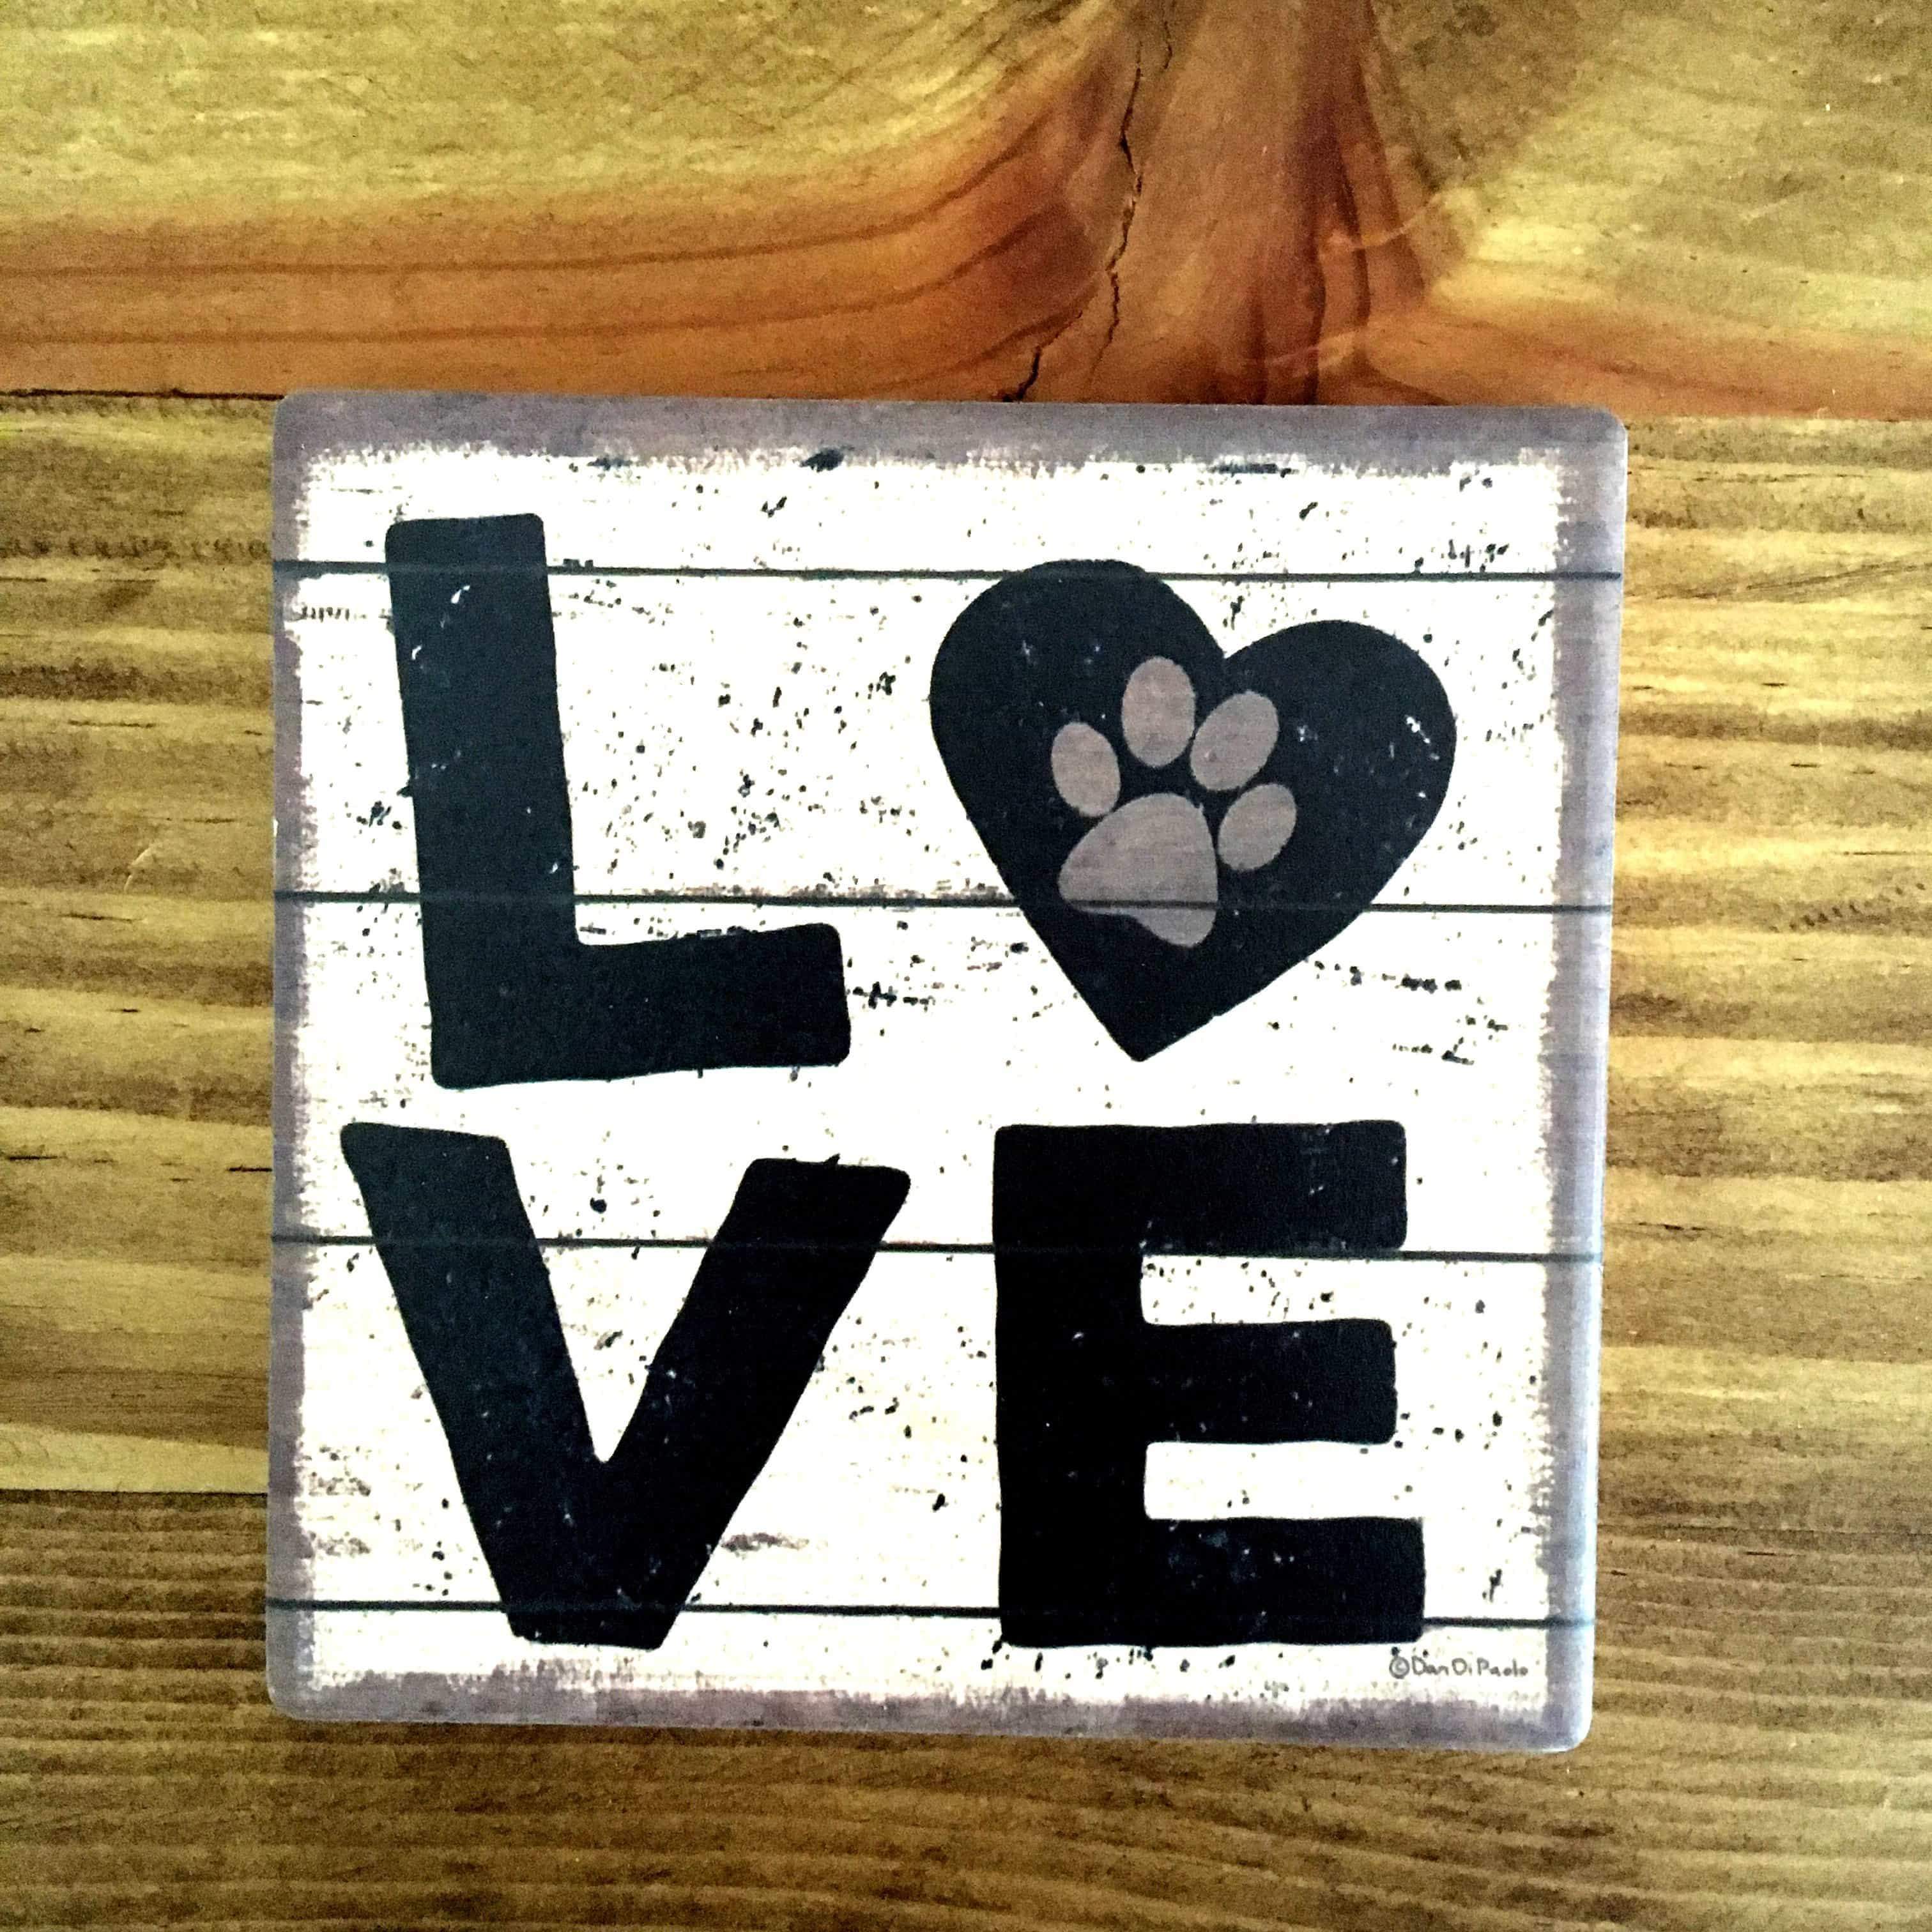 Unique Gifts for Cat Lovers, Cat Coaster Featuring the Word Love and A Paw Print